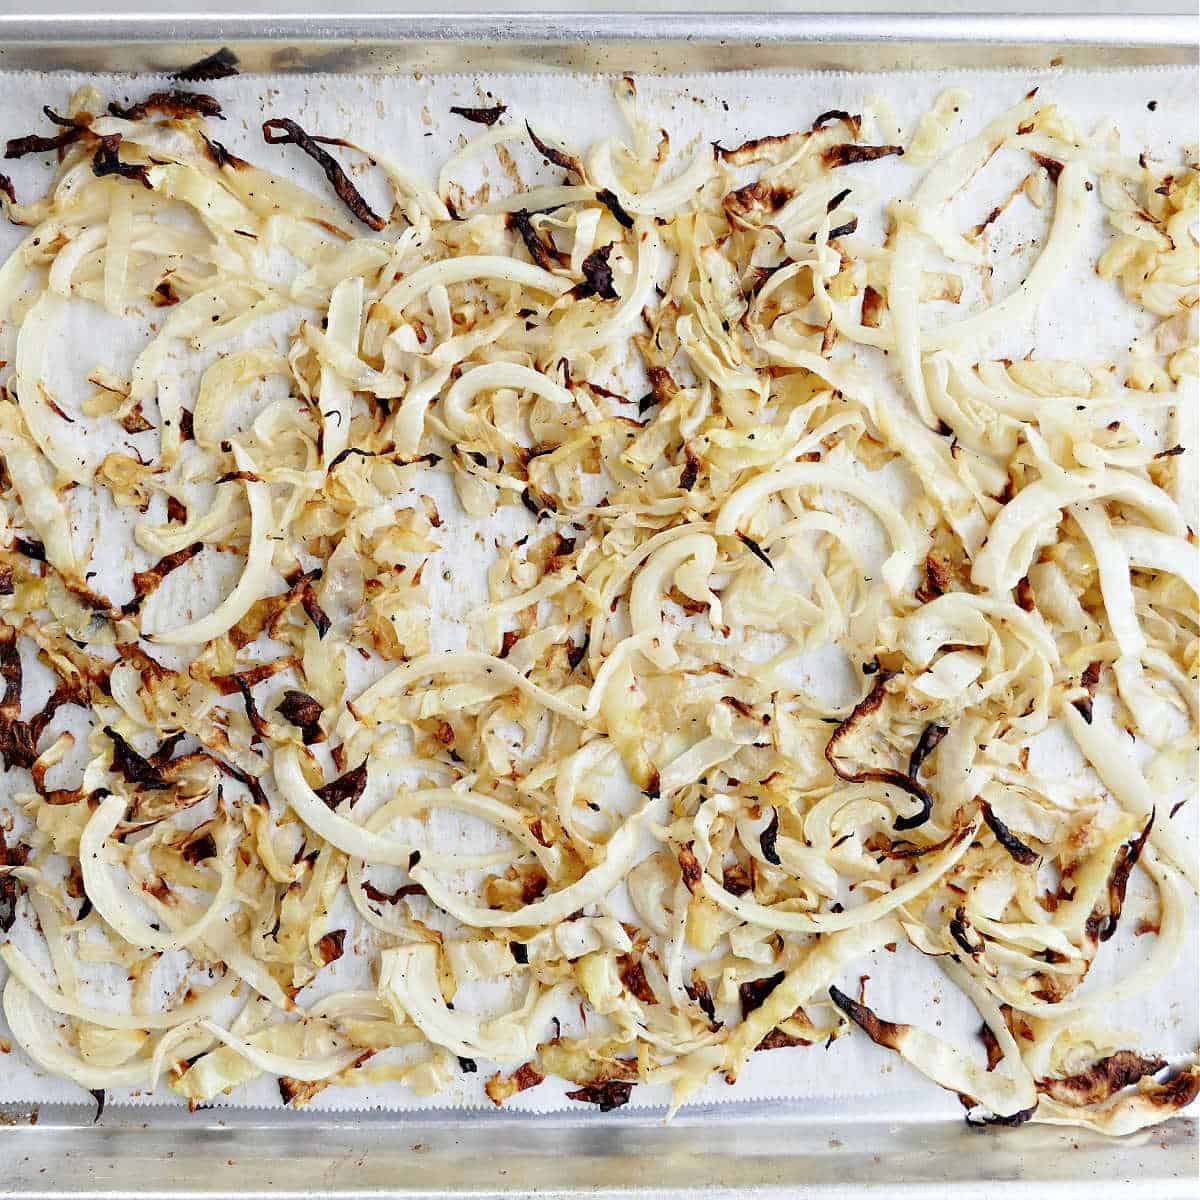 Roasted cabbage on a sheet pan after baking.